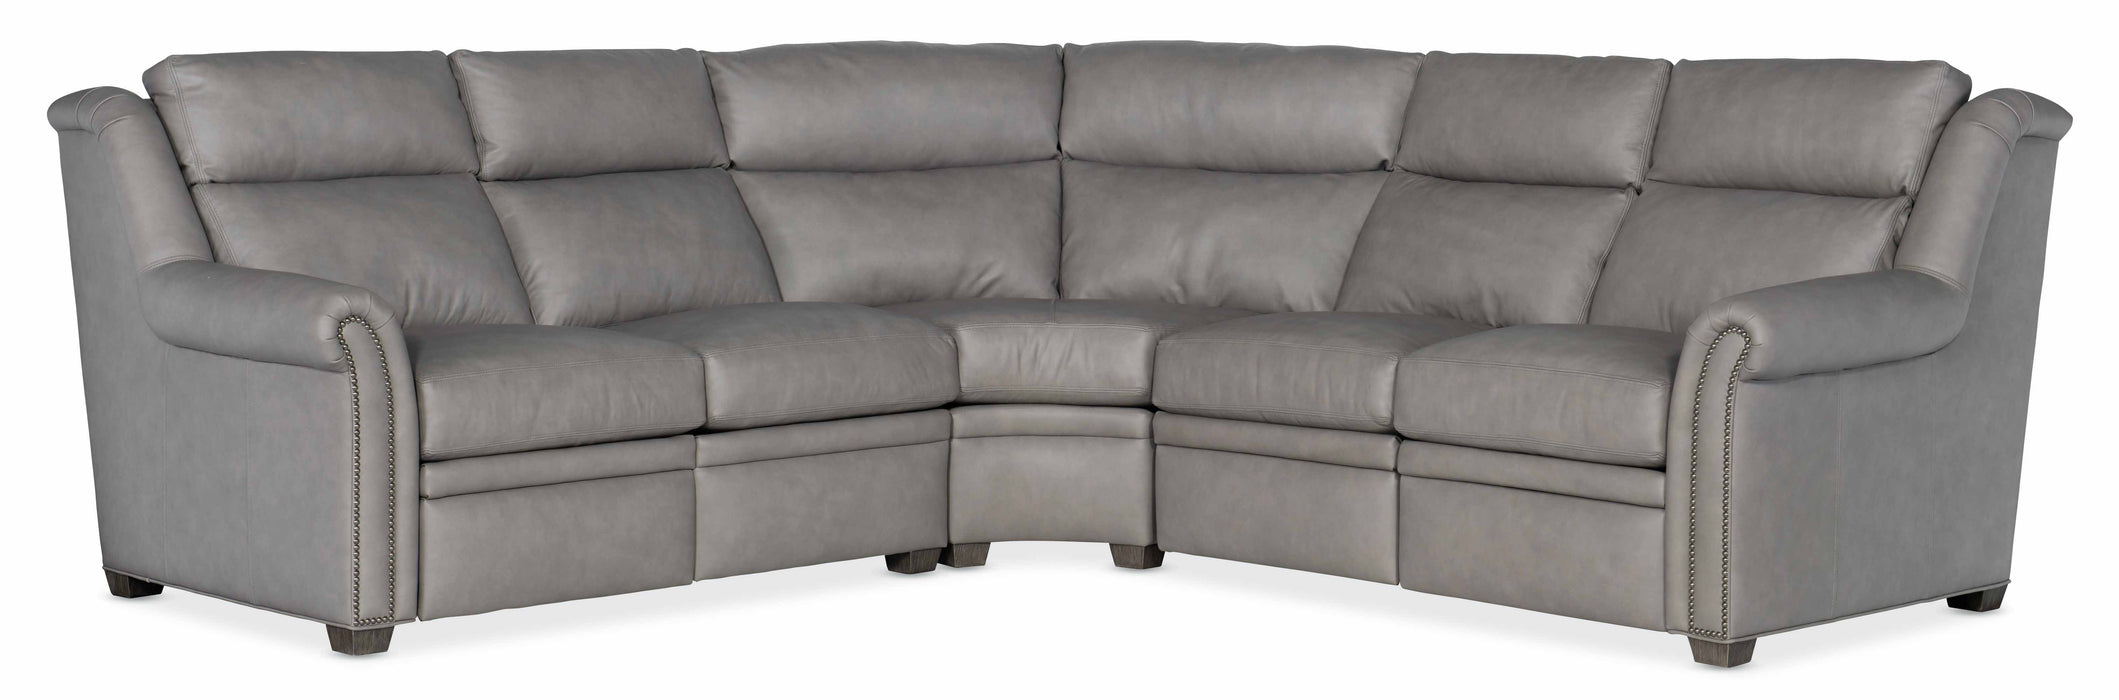 Bolton Leather Sectional